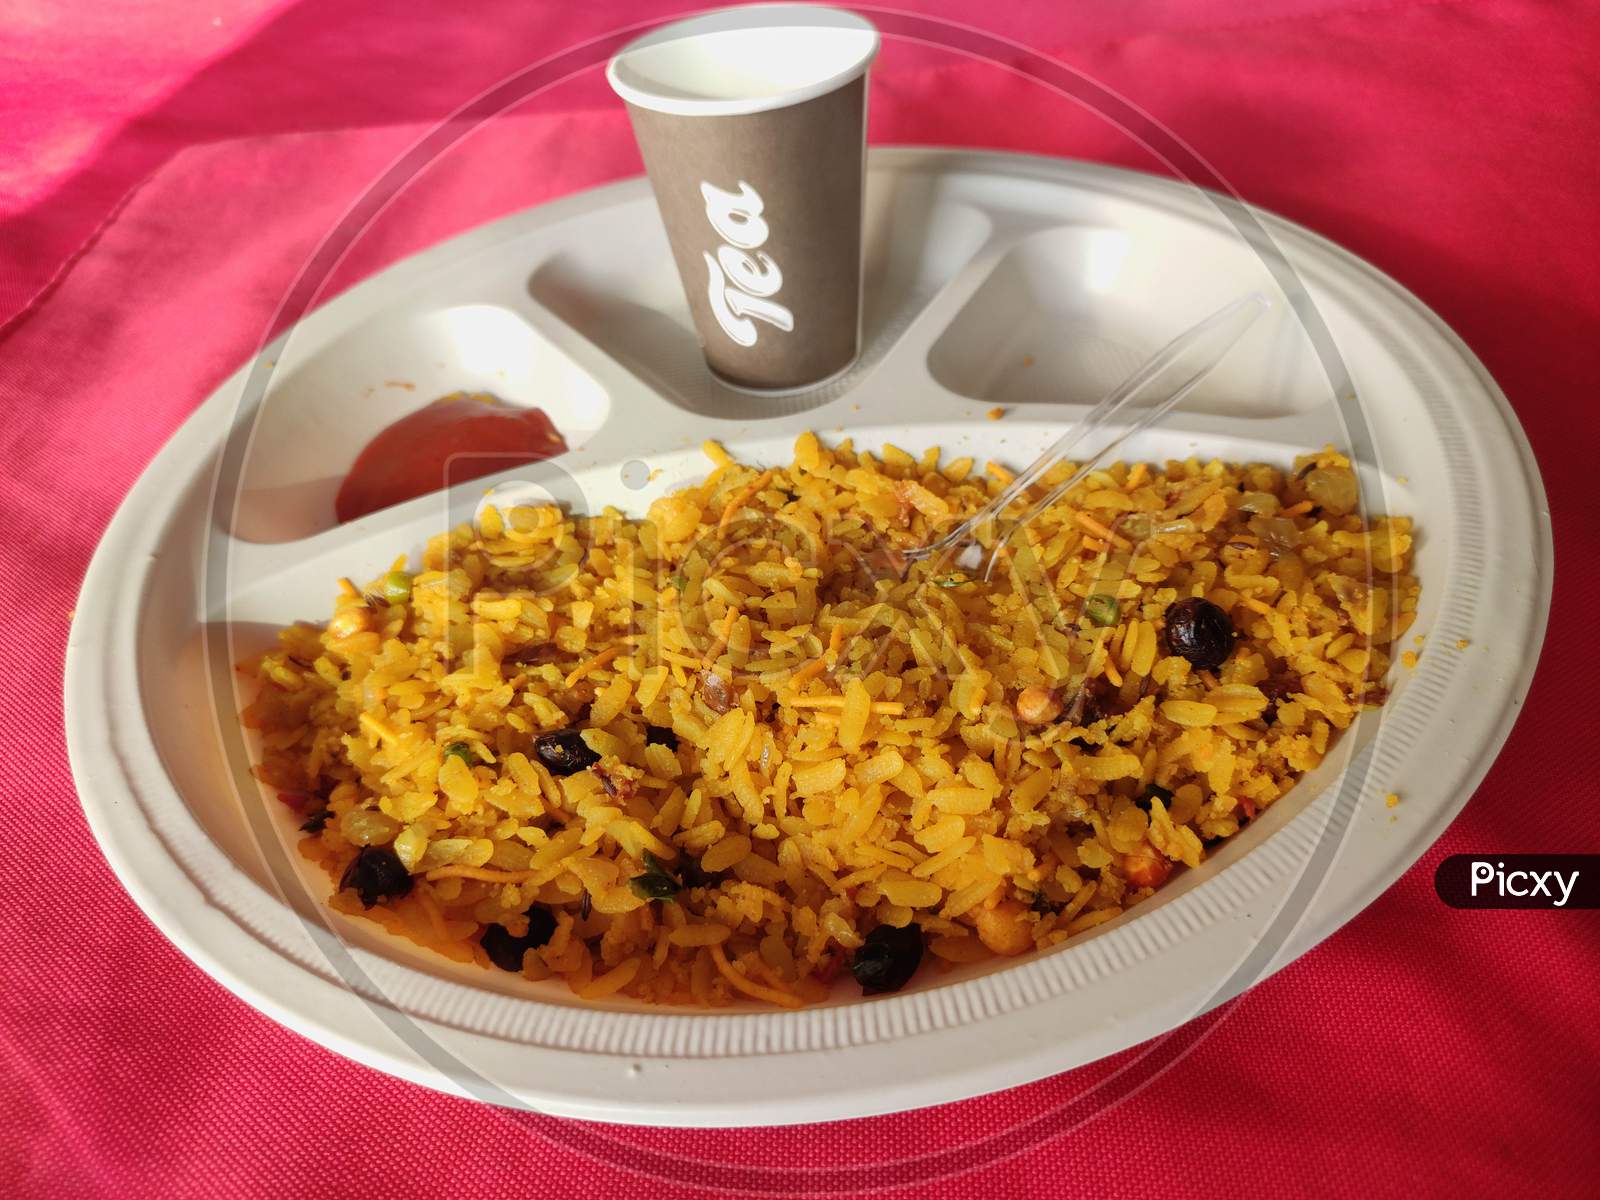 poha or aalu poha or pohe made up of beaten rice or flattened rice, favourite indian snack taken with tea in plate